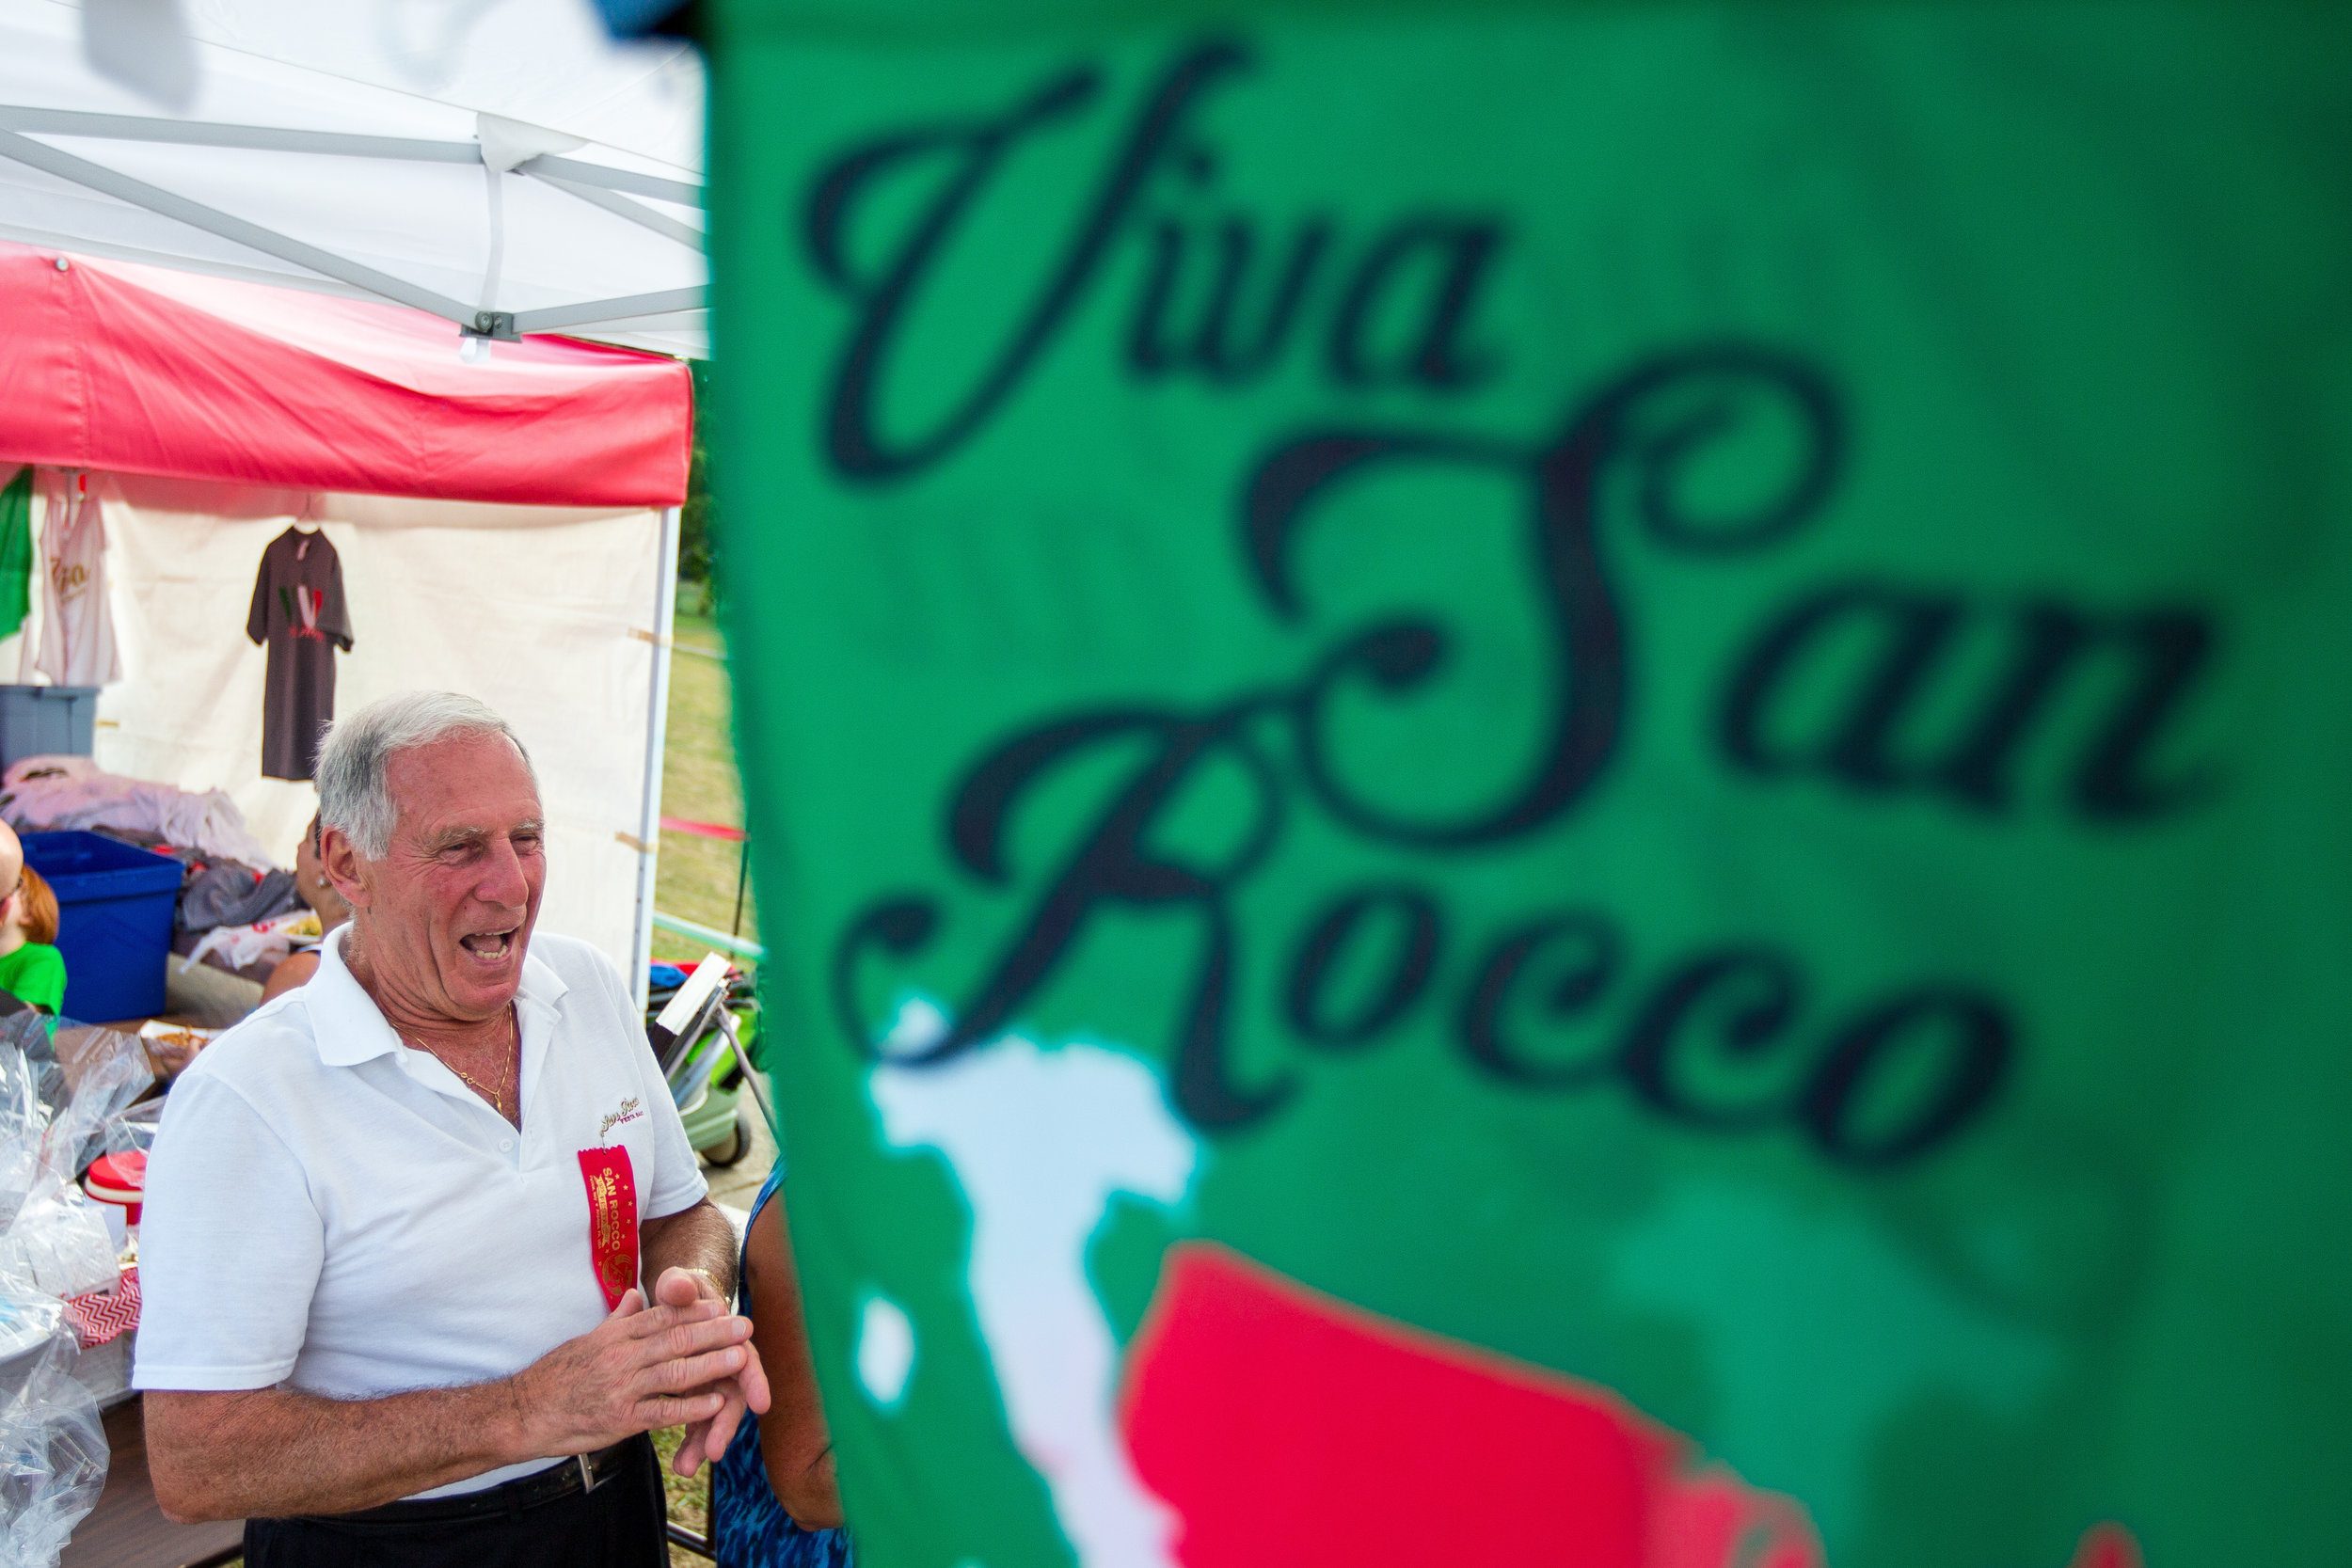  Henry Bufalini talks to friends at the 91st San Rocco Festa in Aliquippa on Friday afternoon. The festival took place over three days and featured live music, vendors, fireworks, a mass and the traditional Baby Doll Dance on Sunday evening.  